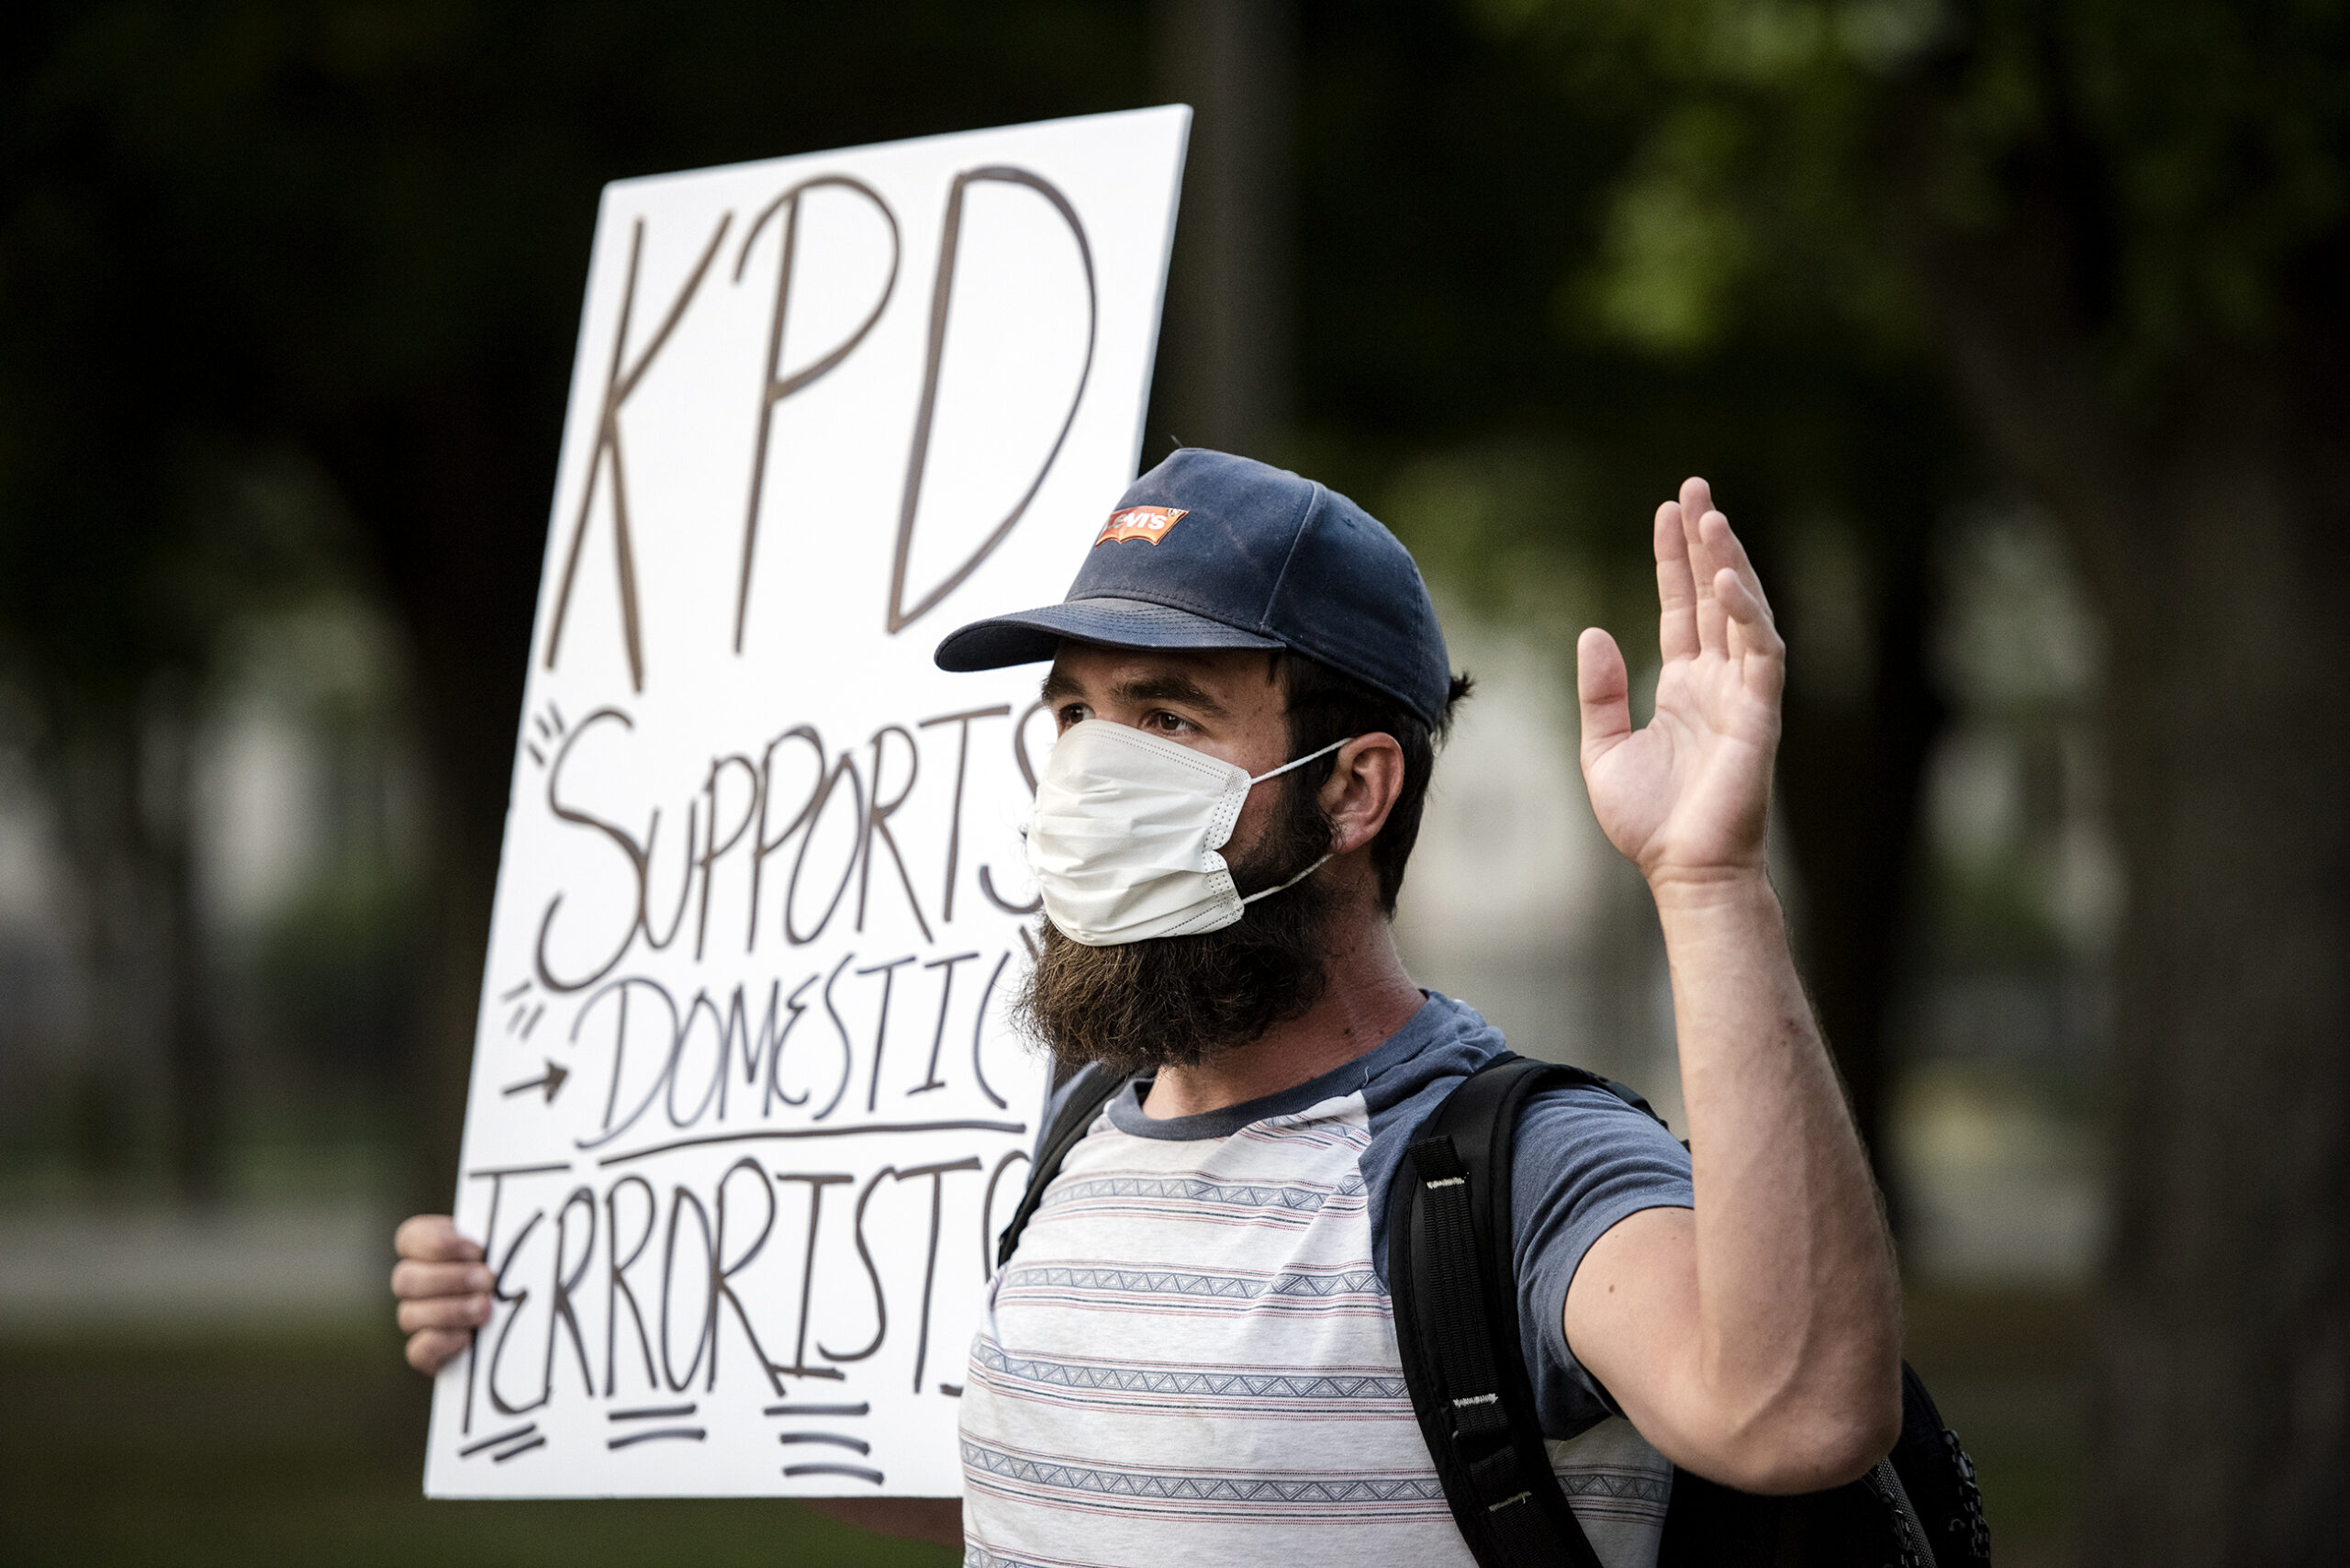 a protester with a sign that says "KPD supports domestic terrorists" holds up his hand